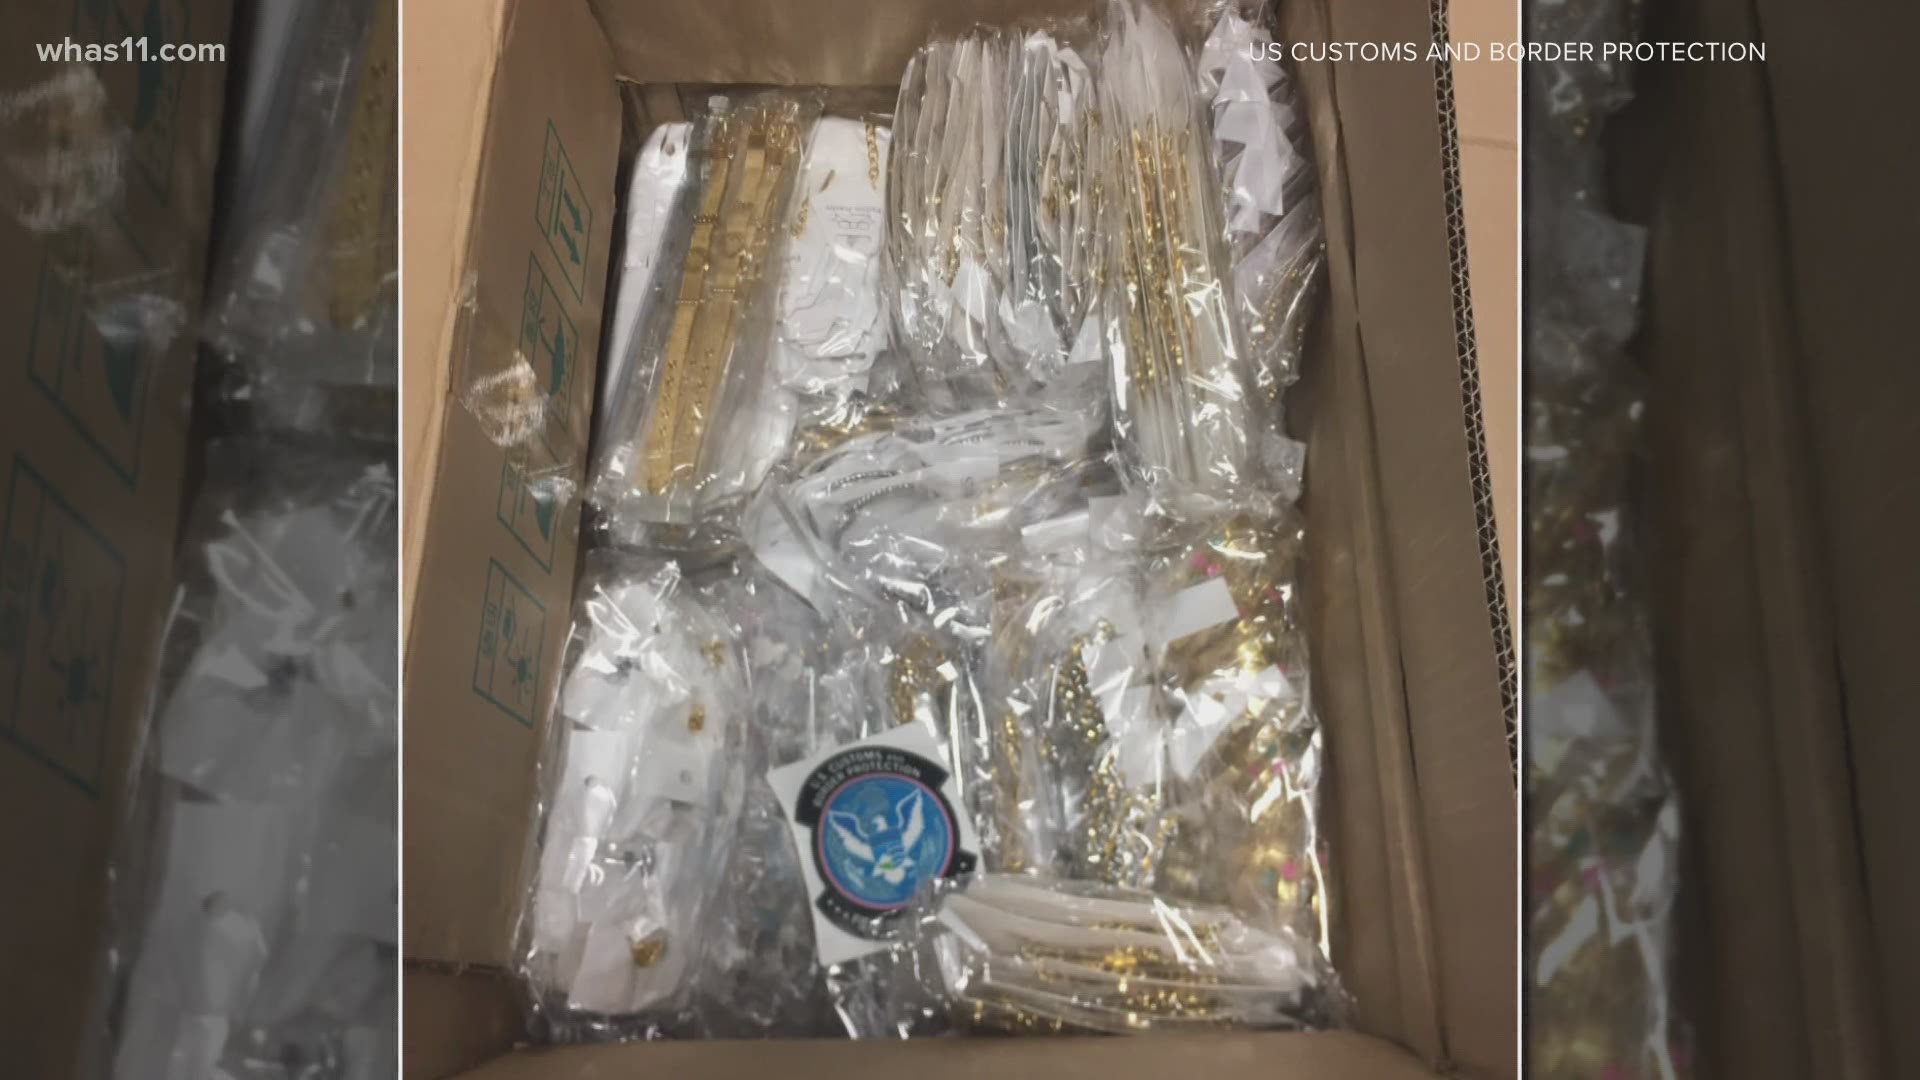 Officers said if the shipment was real, it would have been worth more than $700,000.